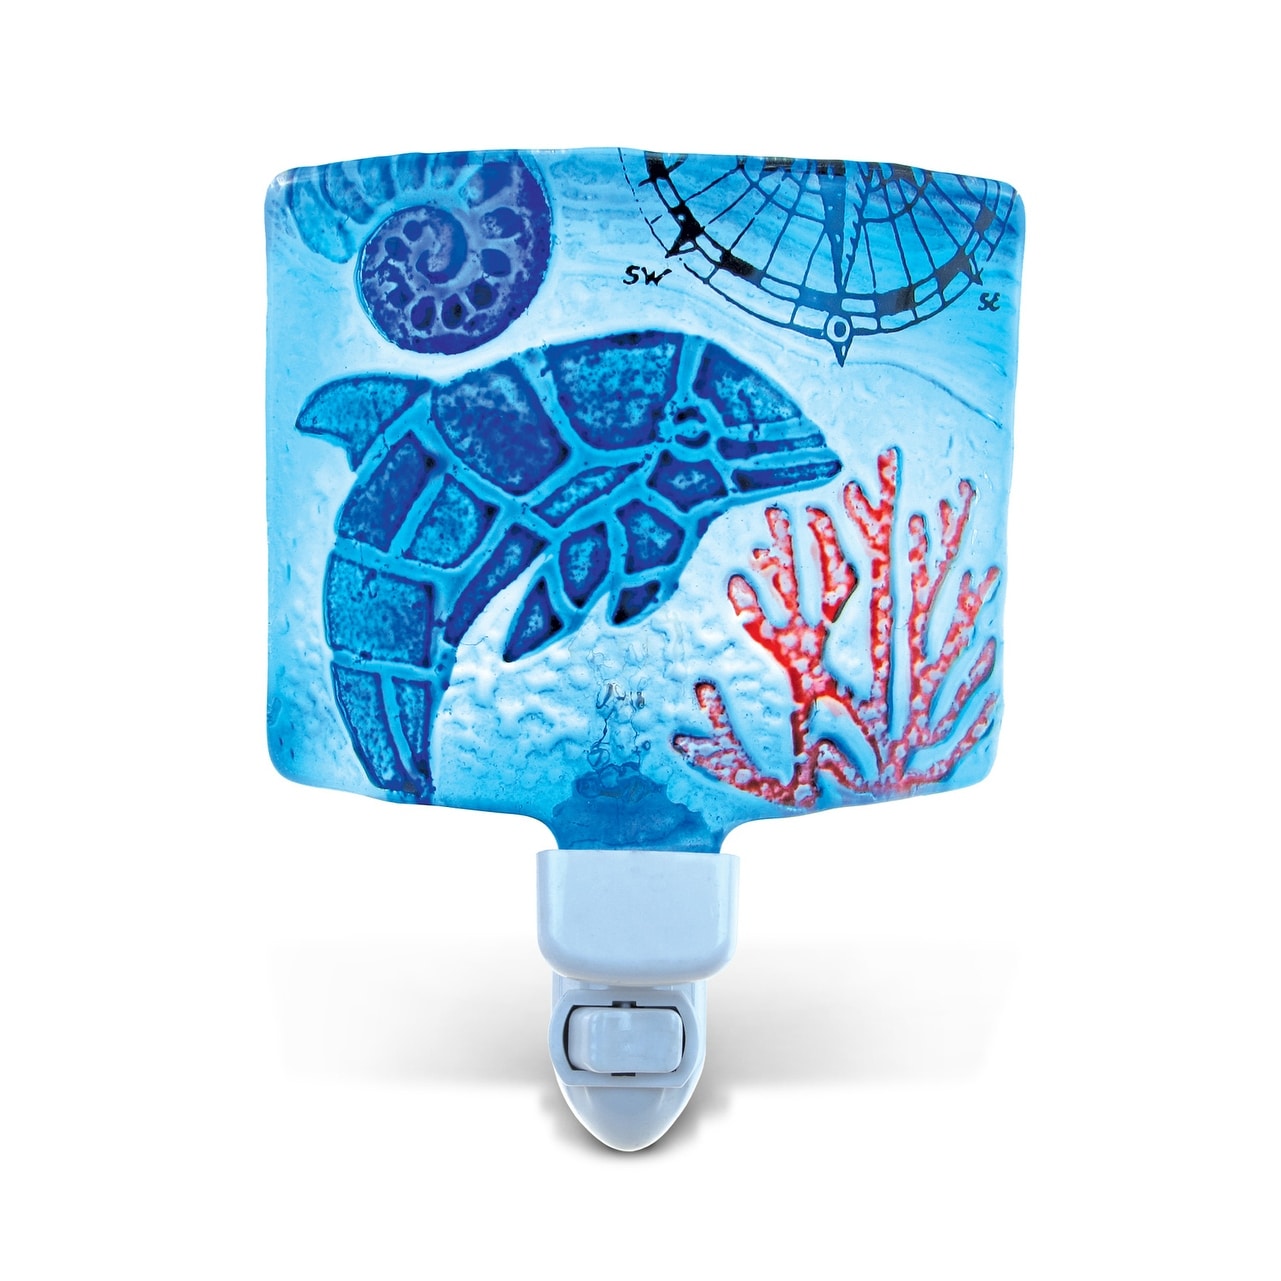 CoTa Global Dolphin Glass Art Night Light, Manual On And Off Switch - ‎4.5 x 3 x 6 inches